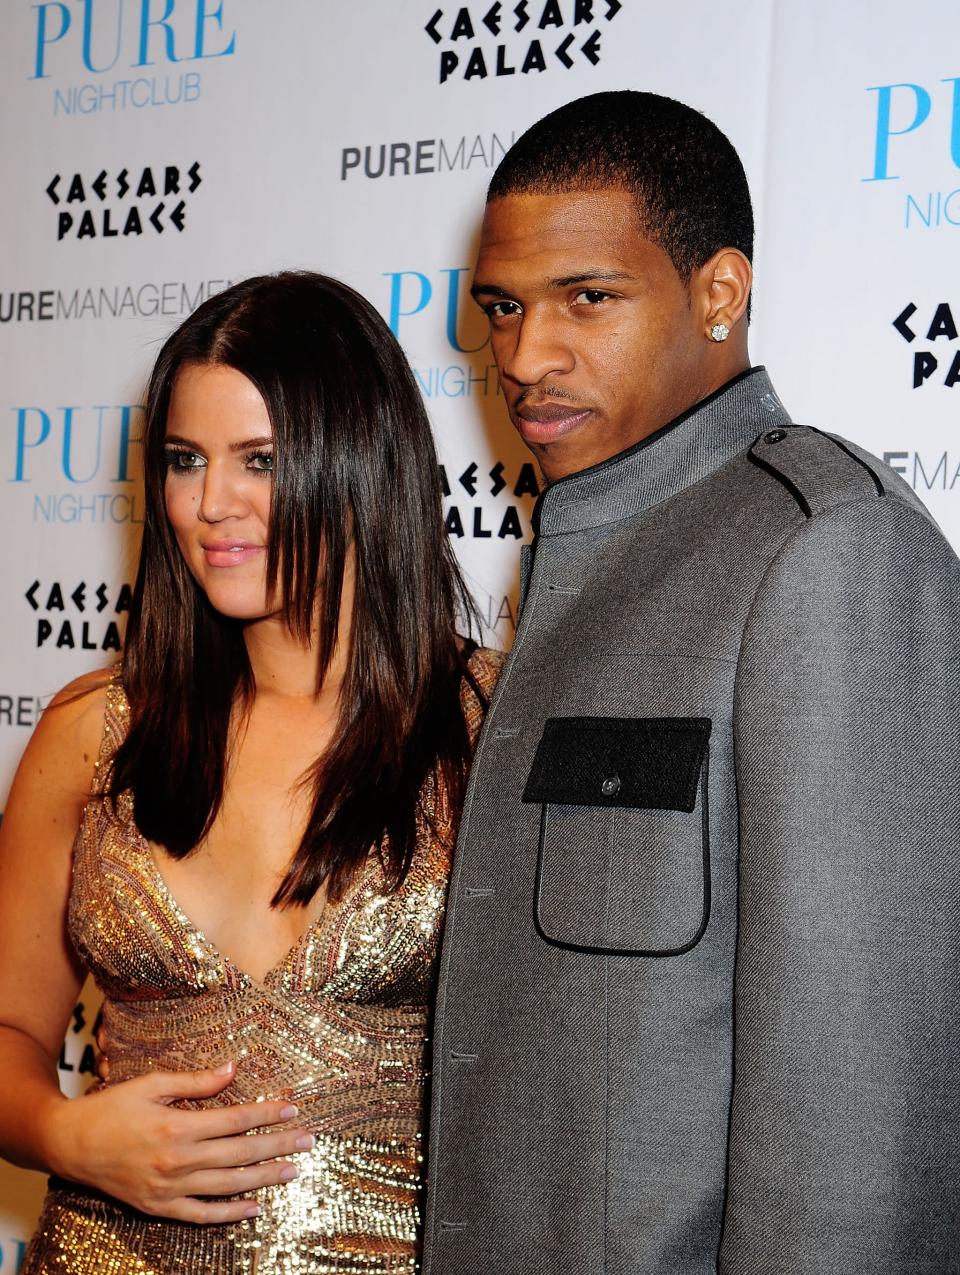 <p>Kardashian's first romance in the spotlight was with then-Minnesota Timberwolves player Rashad McCants. The two briefly started dating sometime in late 2008, with McCants seen as Kardashian's date at a Las Vegas nightclub in December 2008. The two's fling was short lived, however, and Kardashian accused McCants of cheating on her and "hooking up with girls on Facebook" in an episode of "Kourtney and Khloe Take Miami," as reported by <a href="https://www.mirror.co.uk/3am/celebrity-news/khloe-kardashians-heartbreak-love-life-25925739" class="link " rel="nofollow noopener" target="_blank" data-ylk="slk:The Mirror">The Mirror</a>. In January 2009, the pair officially split. McCants has vehemently denied ever cheating on Kardashian, and even went as far to argue that the reality-TV star's allegations were "made up." McCants told <a href="https://pagesix.com/2009/11/05/nba-player-khloe-faked-it/" class="link " rel="nofollow noopener" target="_blank" data-ylk="slk:Page Six">Page Six</a> in November 2009 that the two had "had already called it quits" when she allegedly found evidence of him cheating.</p>